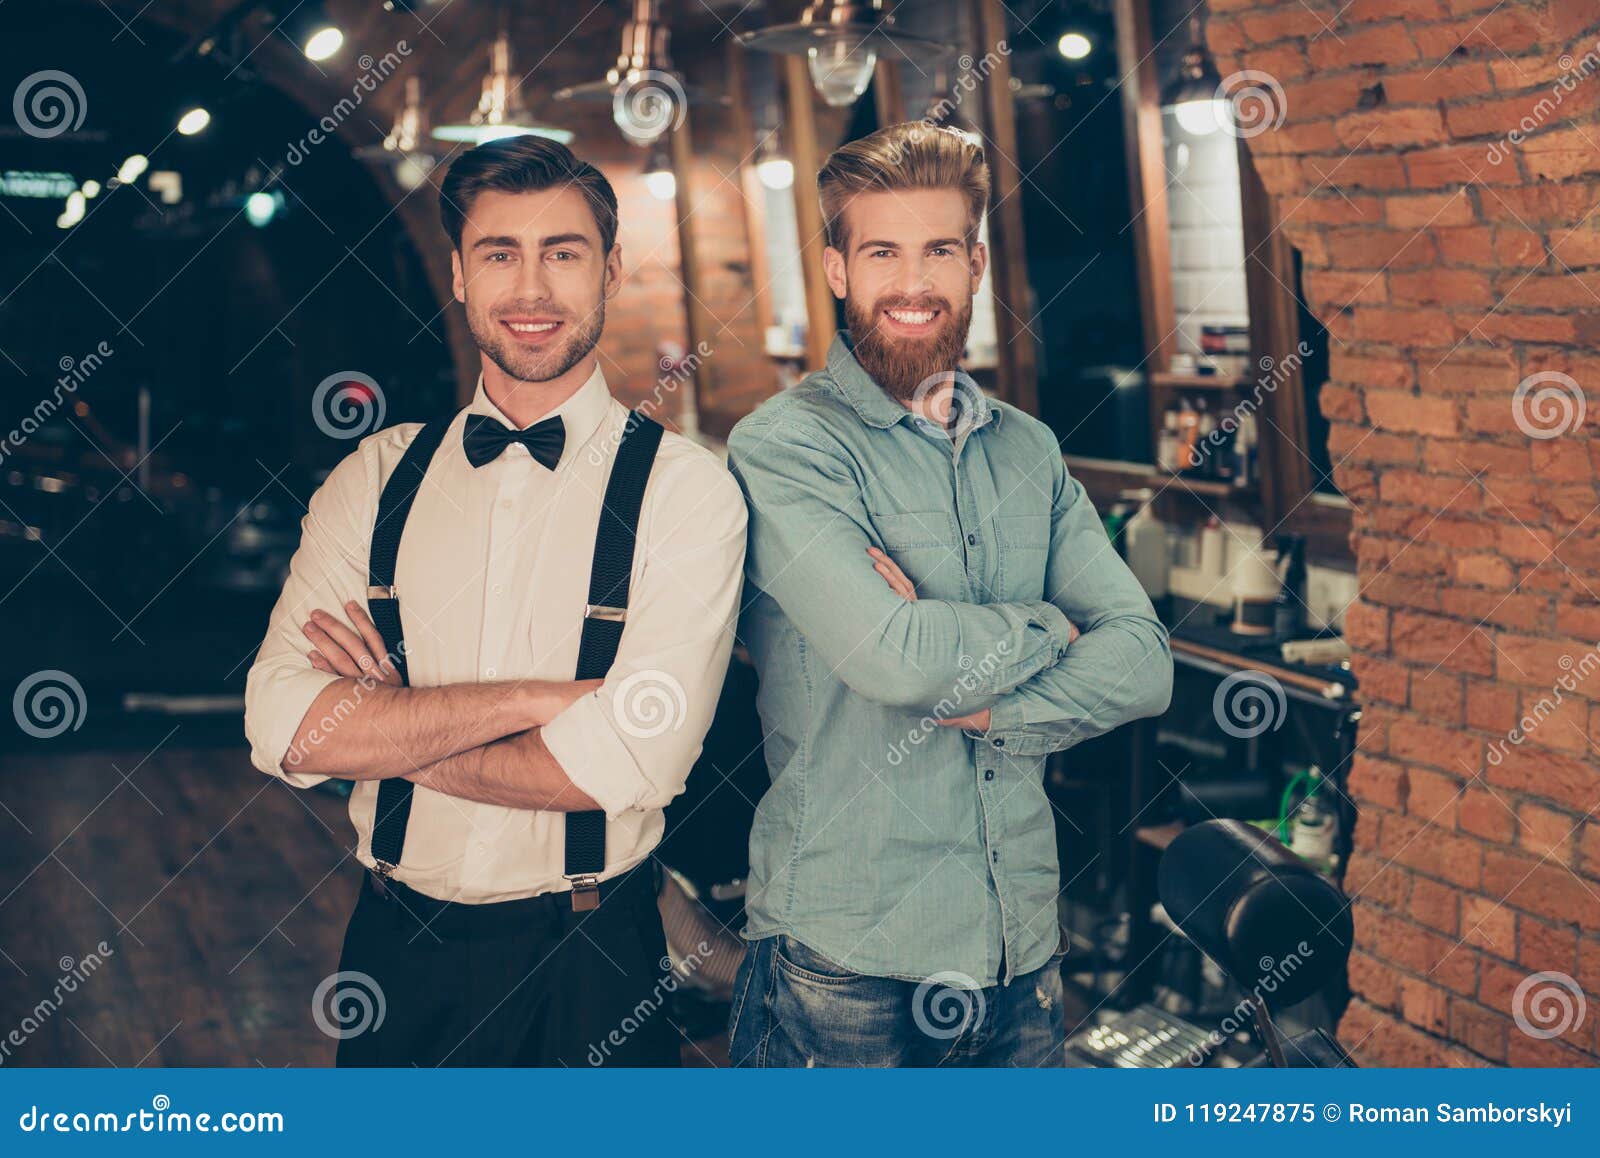 Frontier Jeg var overrasket klasse Welcome To Barber Shop! Red Bearded Handsome Young Man in a Casual Jeans  Outfit and Attractive Brunette Dressed Classy are Stock Image - Image of  jeans, guys: 119247875